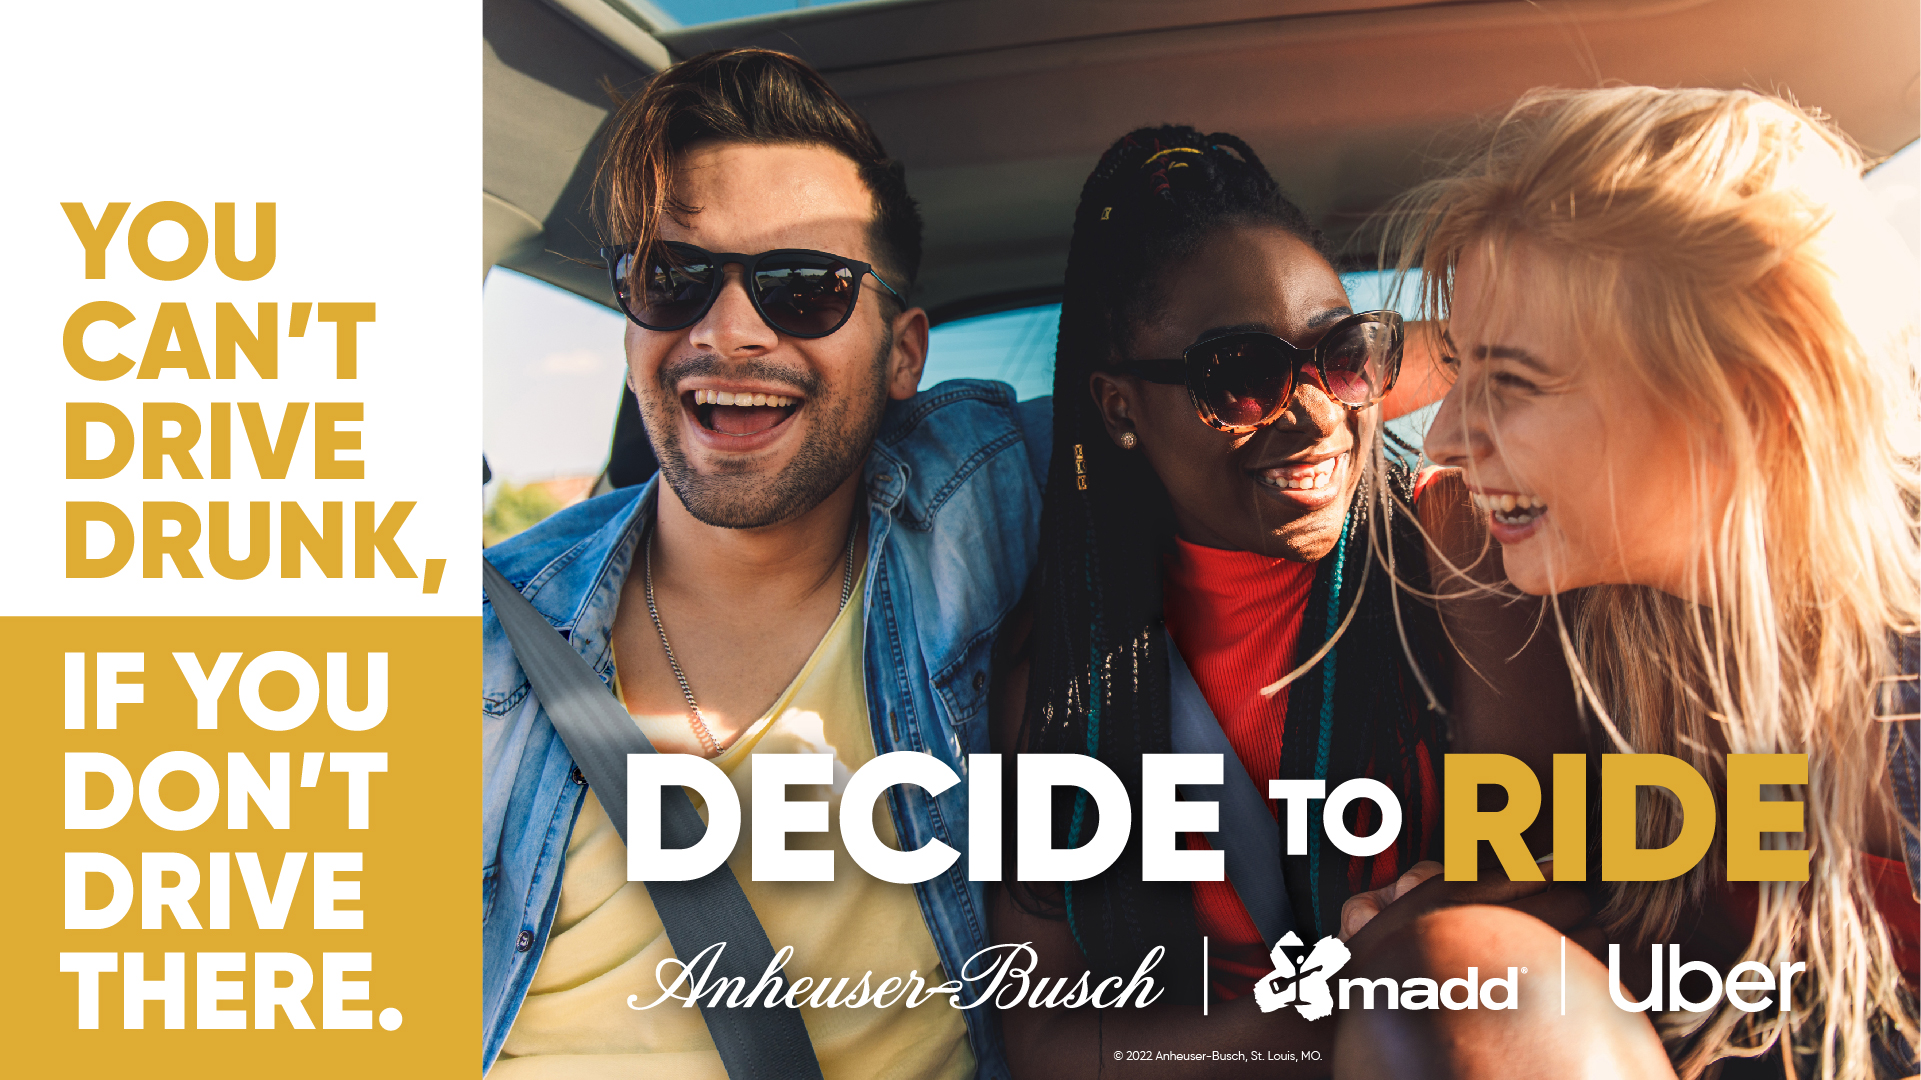 Anheuser-Busch, MADD and Uber Partner with the New York State Governor’s Traffic Safety Committee to Help Prevent Drunk Driving in Buffalo this Summer Through the Decide to Ride Campaign